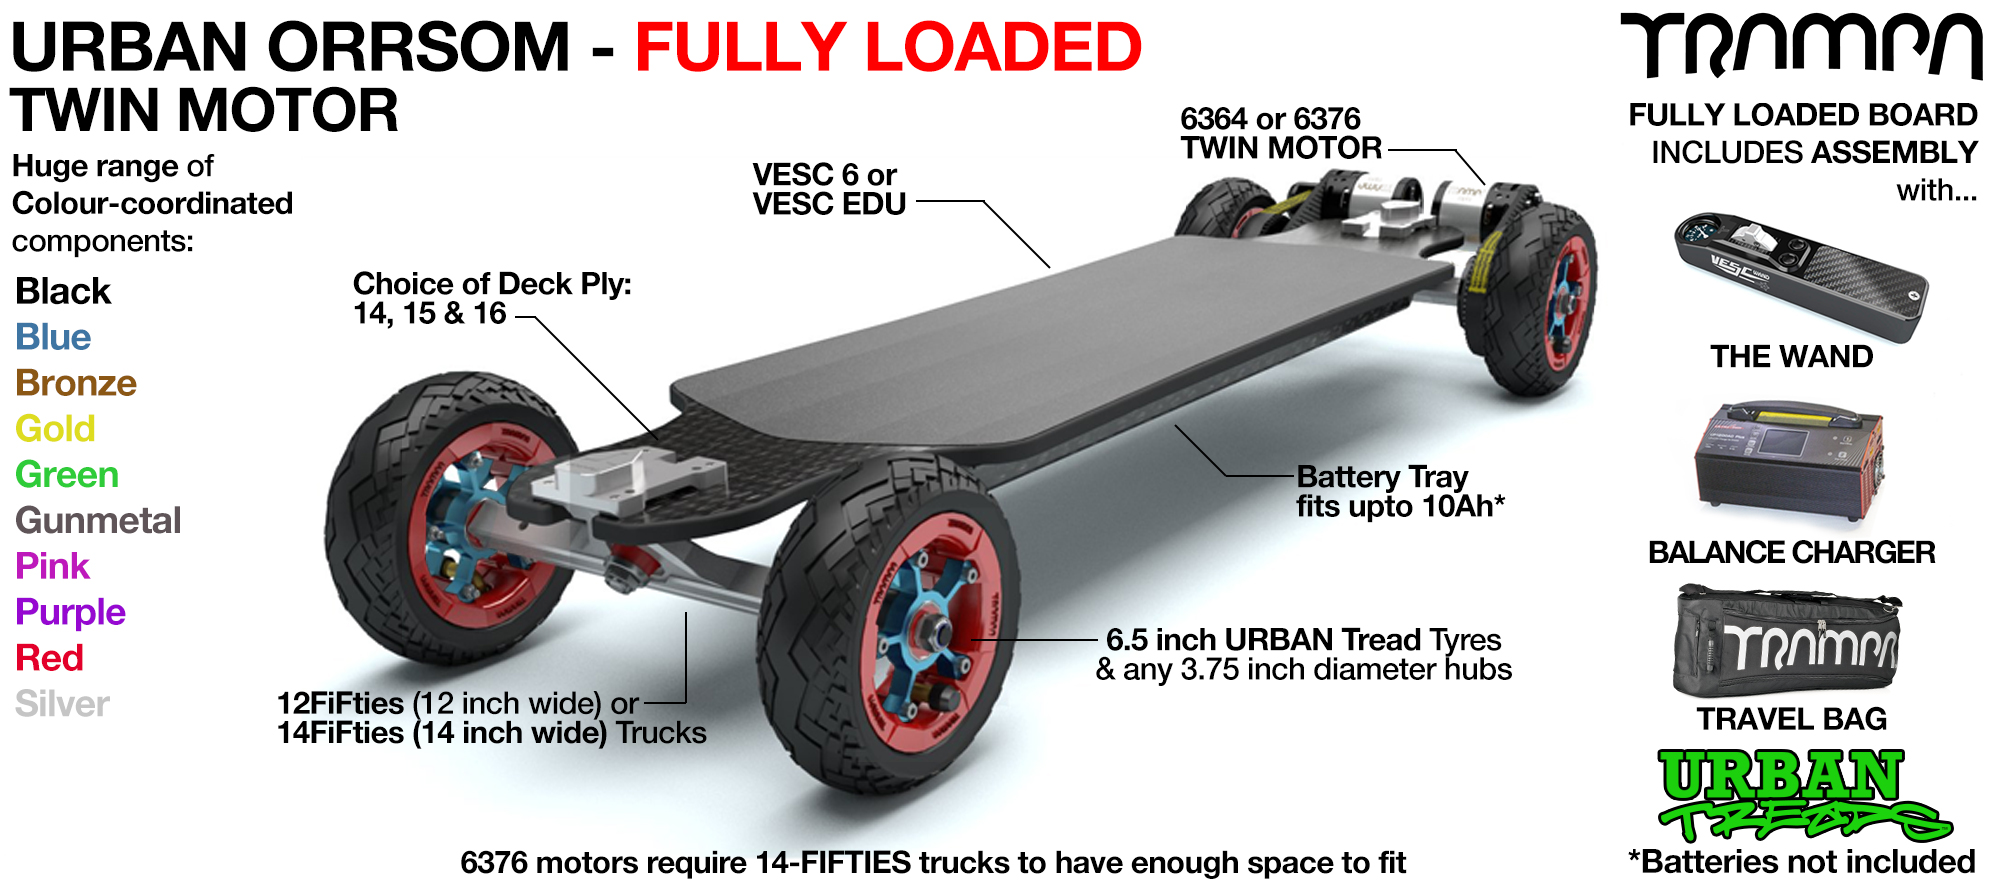 TRAMPA's 12FiFties ORRSOM Electric Longboard with URBAN TREADS Pneumatic Tyres TWIN Motor - FULLY LOADED